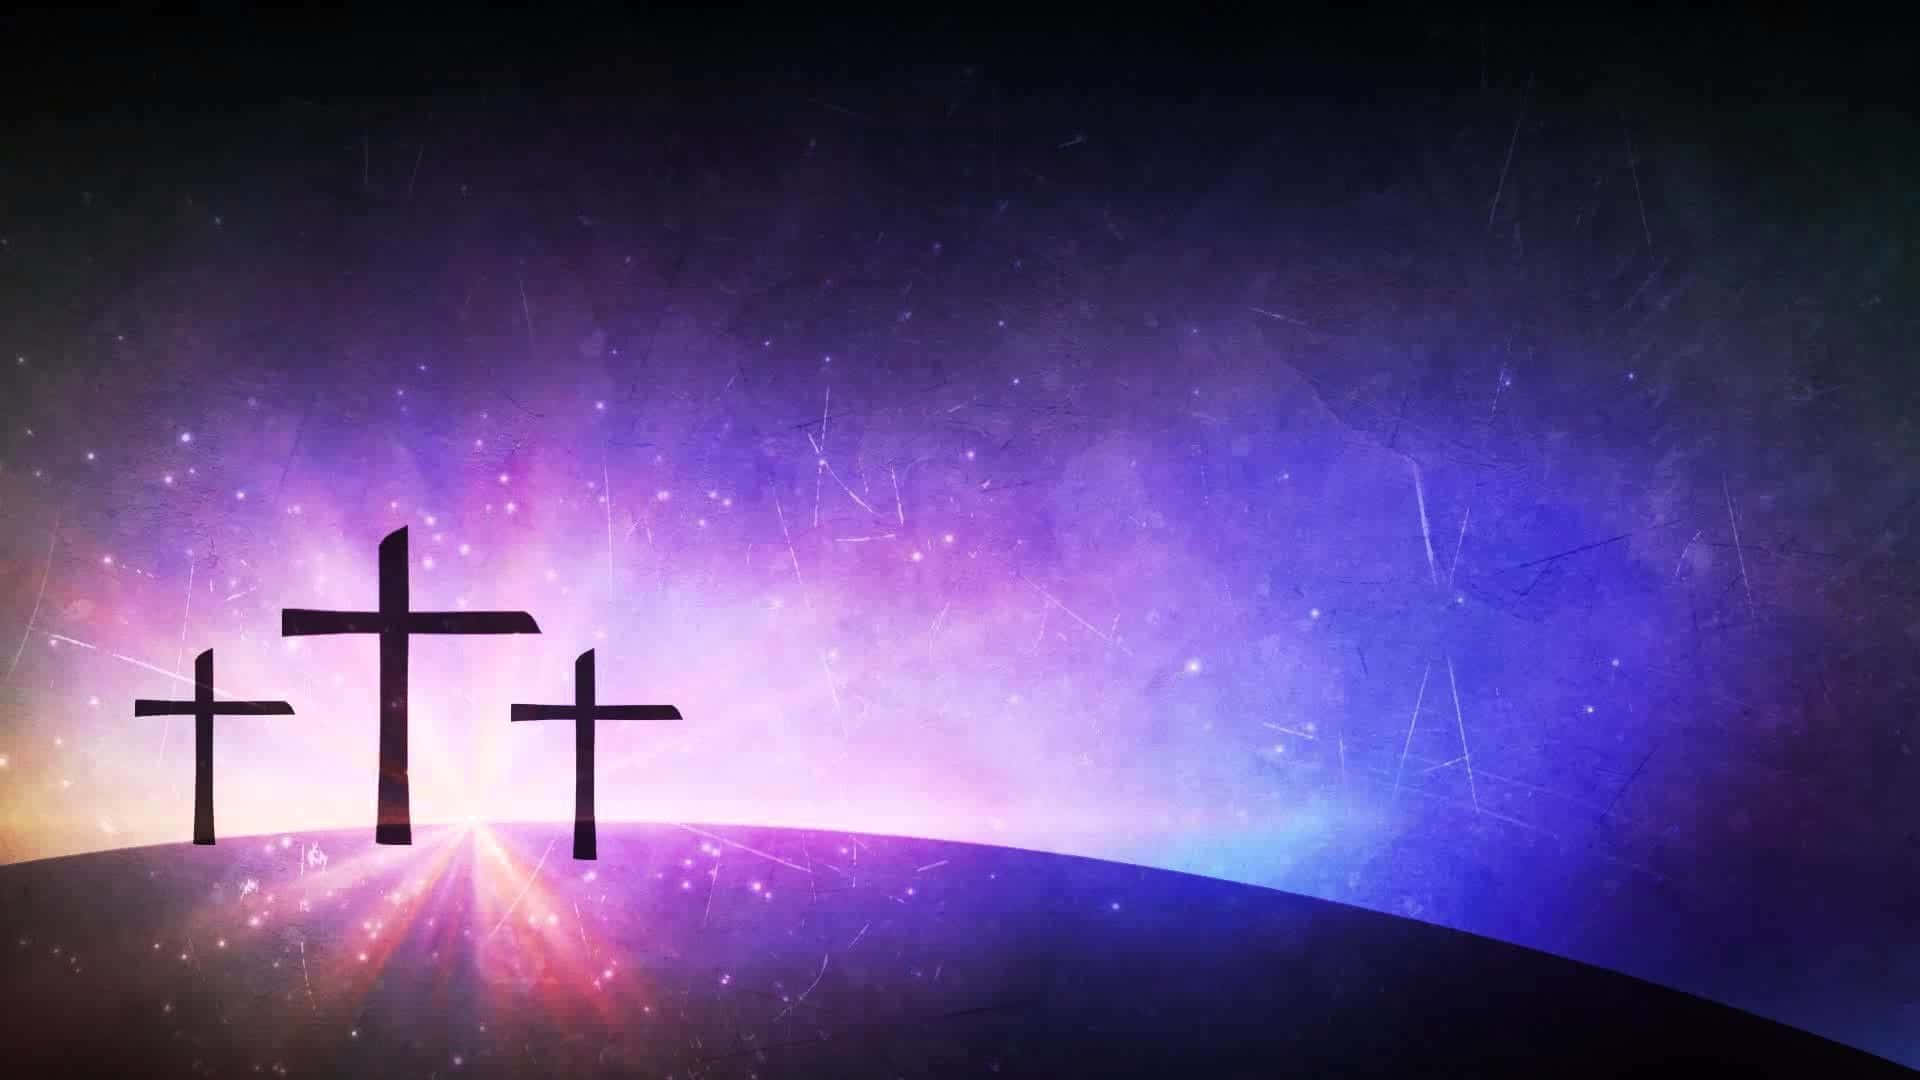 powerpoint worship backgrounds